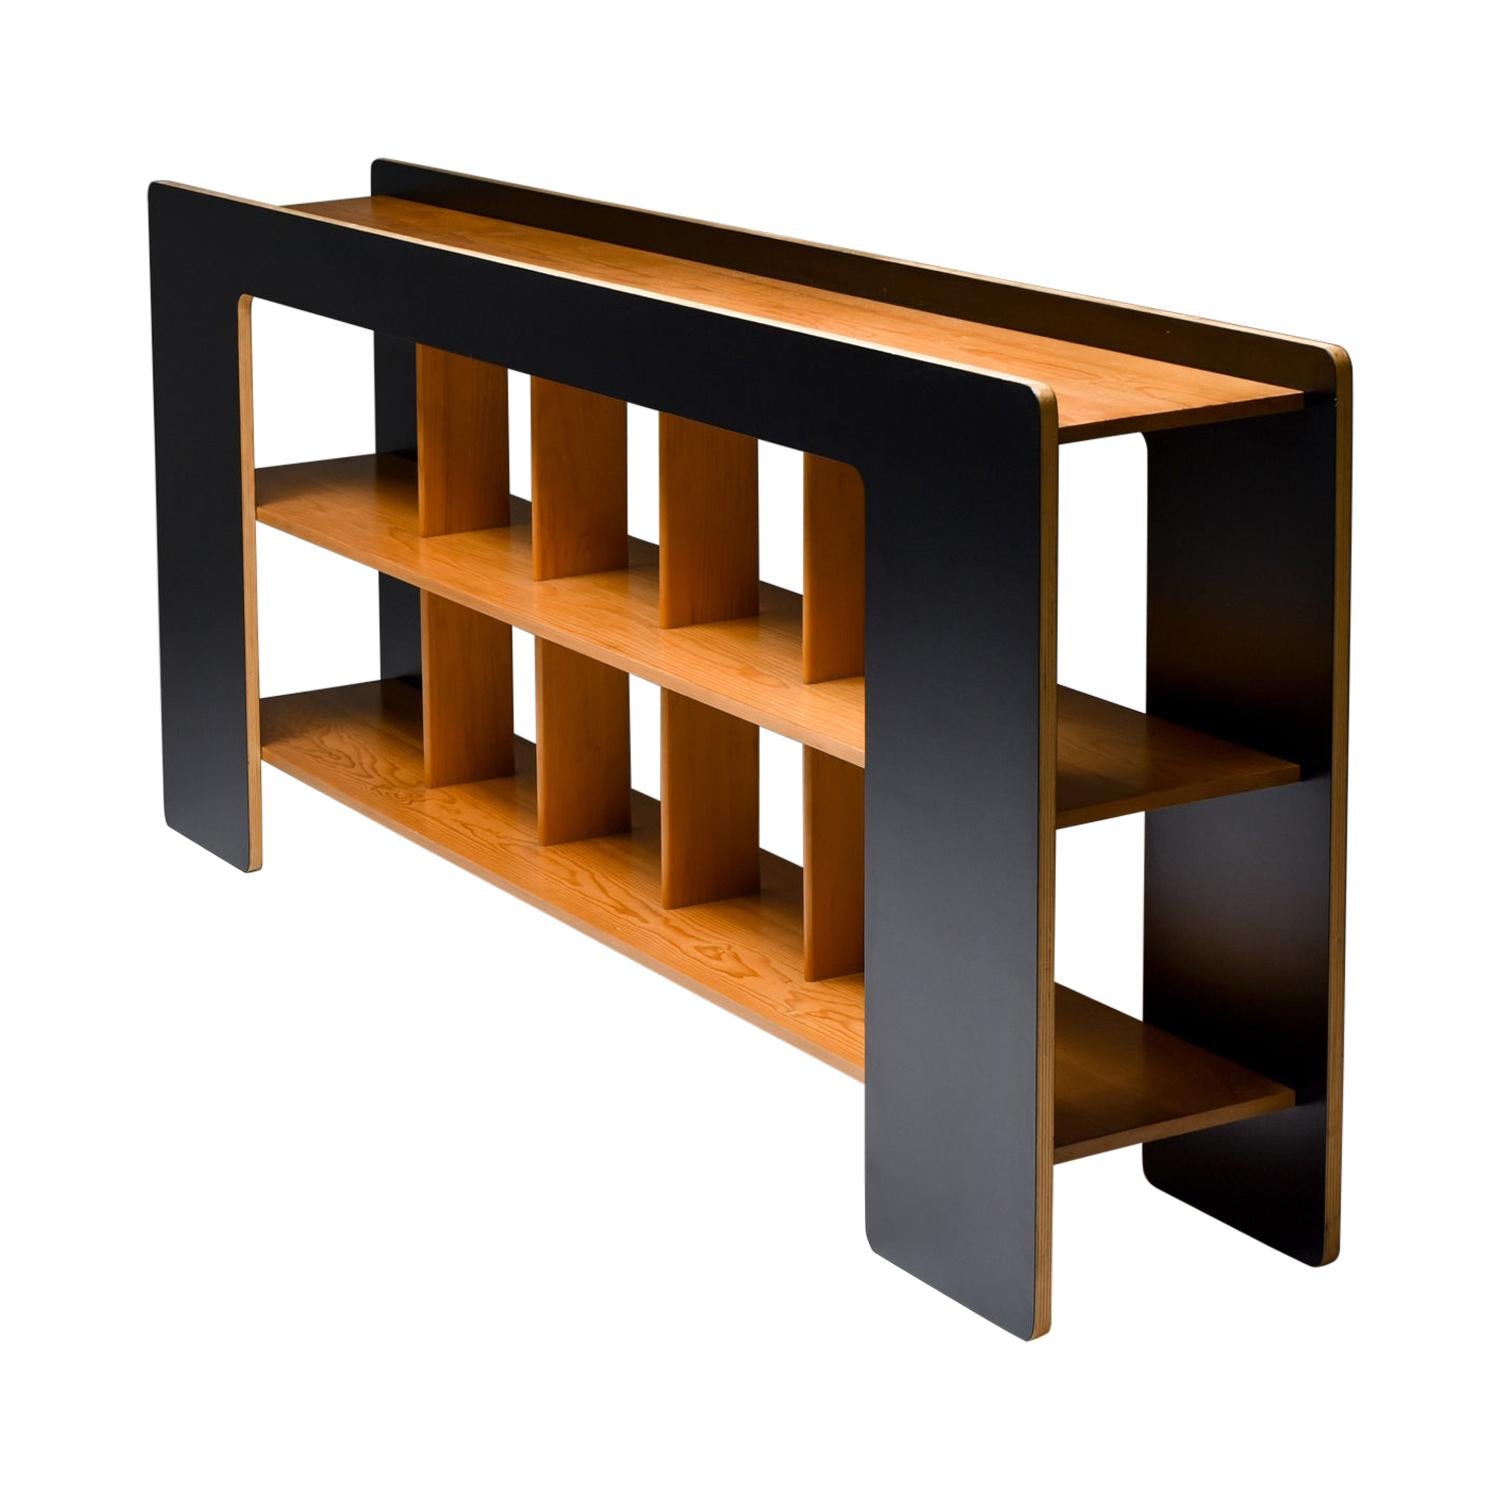 Post-Modern Sideboard with Shelves by Pamio and Toso